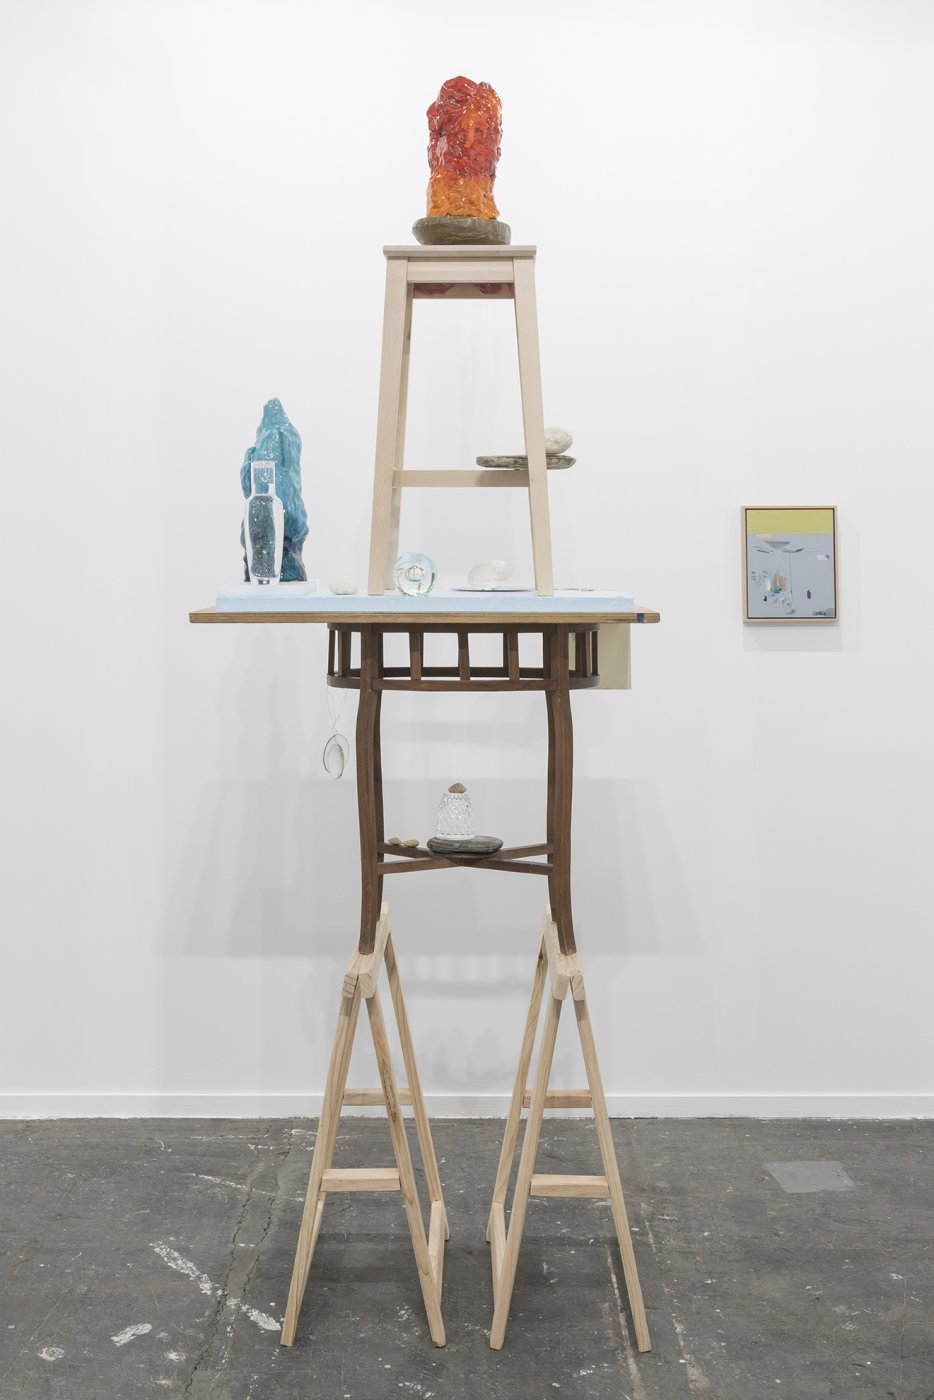 Susanne S. D. Themlitz, Abro a janela. As montanhas afastam-se. Uma planta na minha mão, 2019. Table, easels and wooden bench, ceramic, glass, stones, wax, magnifying glasses, mirror, drawing, wire, adhesive tape, jug, water and coral. 240 x 44 x 66 cm
